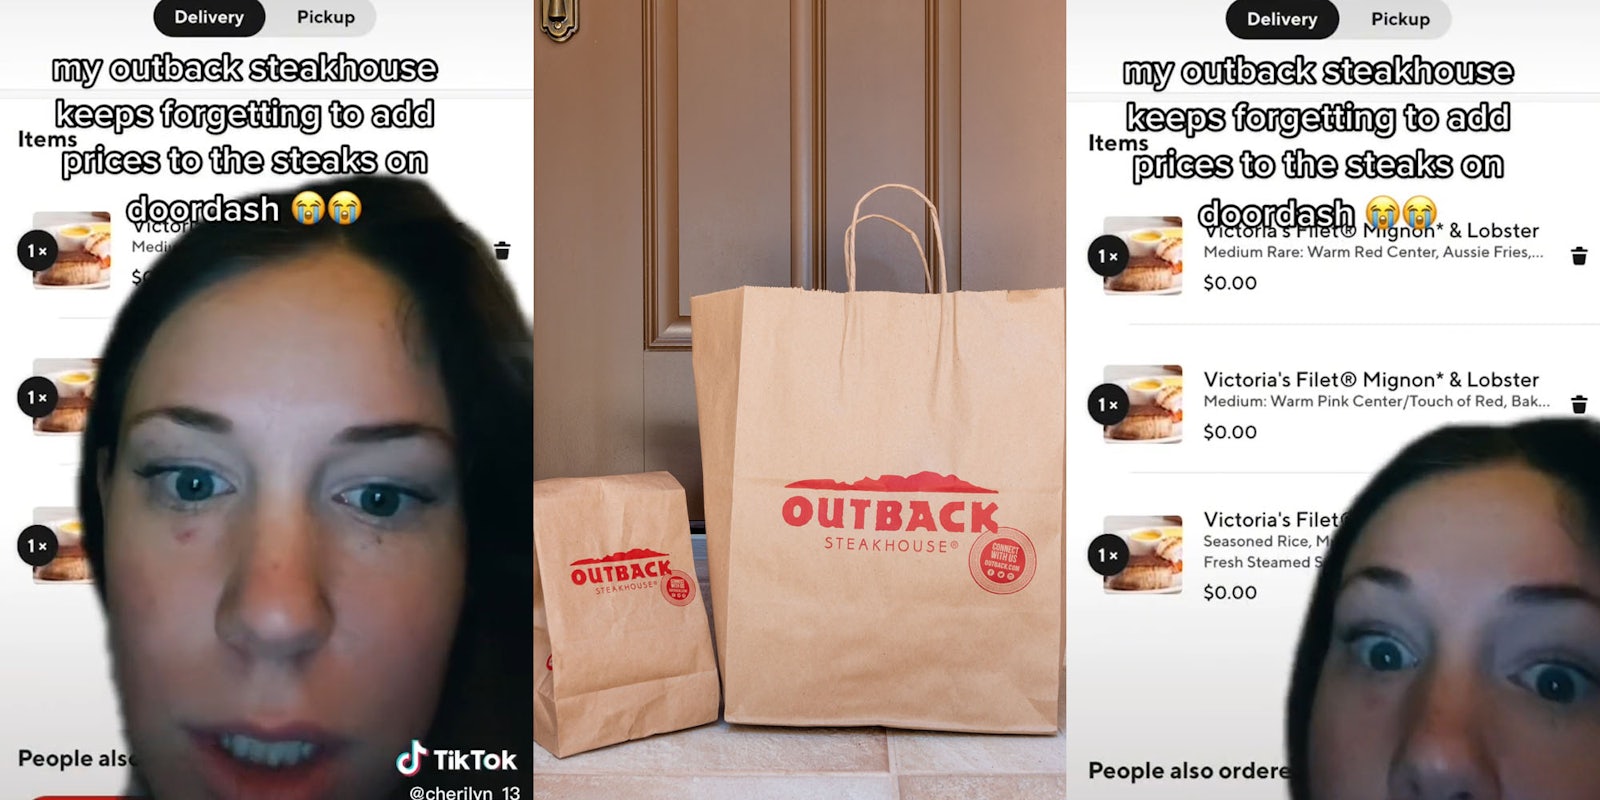 Woman greenscreen TikTok over Doordash app Outback Steakhouse caption 'my outback steakhouse keeps forgetting to add prices to the steaks on doordash' (l) Outback Steakhouse bags on doorstep (c) woman greenscreen TikTok over Doordash app Outback Steakhouse screen with 0.00 as prices for filet mignon and lobster caption 'my outback steakhouse keeps forgetting to add prices to the steaks on doordash' (r)